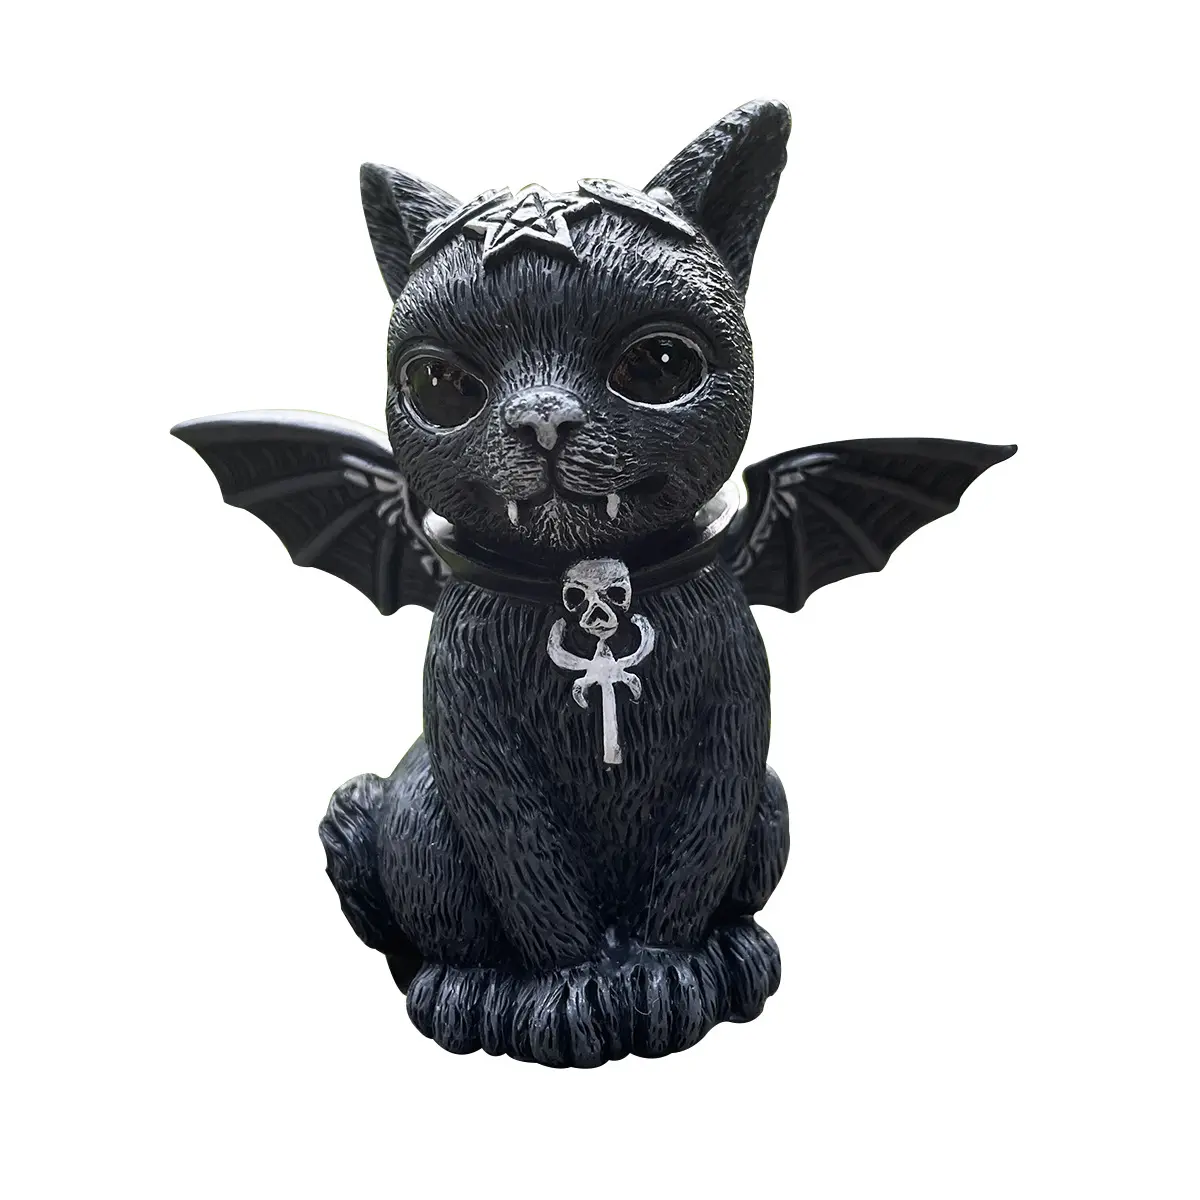 Wholesale Creative Angels Hells Cat Figurines Halloween Decorations Cat Toys Holiday Gifts Resin Crafts